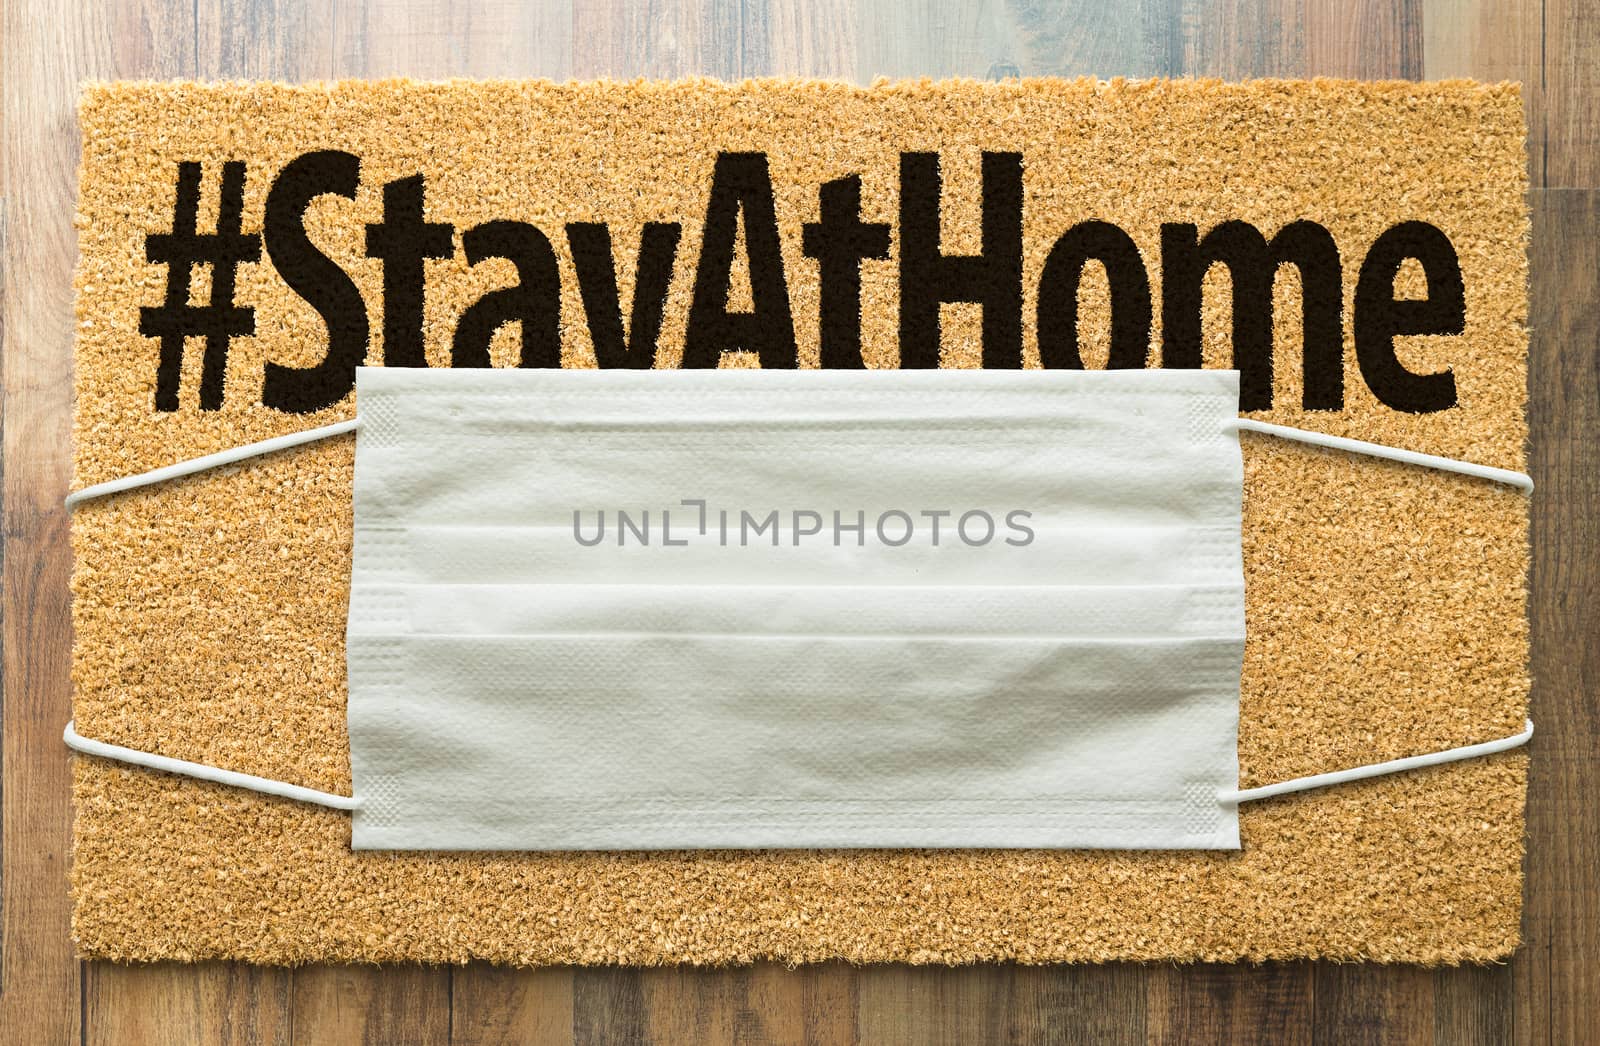 Welcome Mat With Medical Face Mask and #Stay At Home Text Amidst by Feverpitched